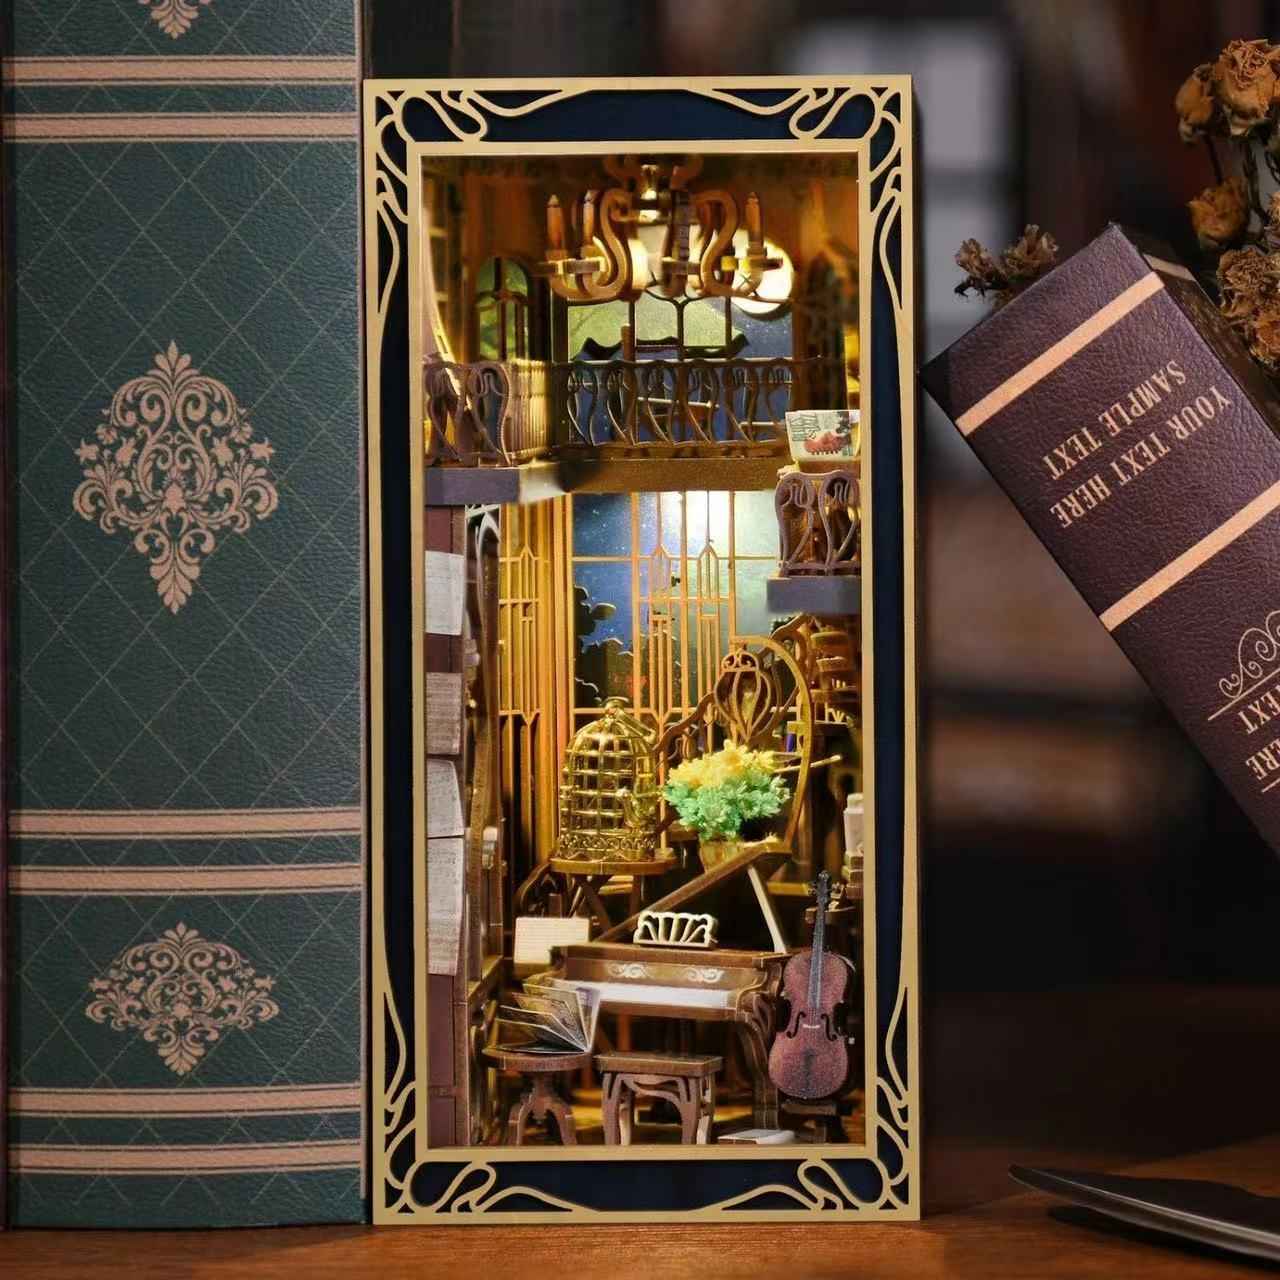 Pianist With Nightingale DIY Book Nook kit inspired by the captivating era of the Art Nouveau movement. perfect for DIY crafting enthusiasts and dollhouse collectors alike. Ideal for bookshelf decor of gift for music or history overs. front side